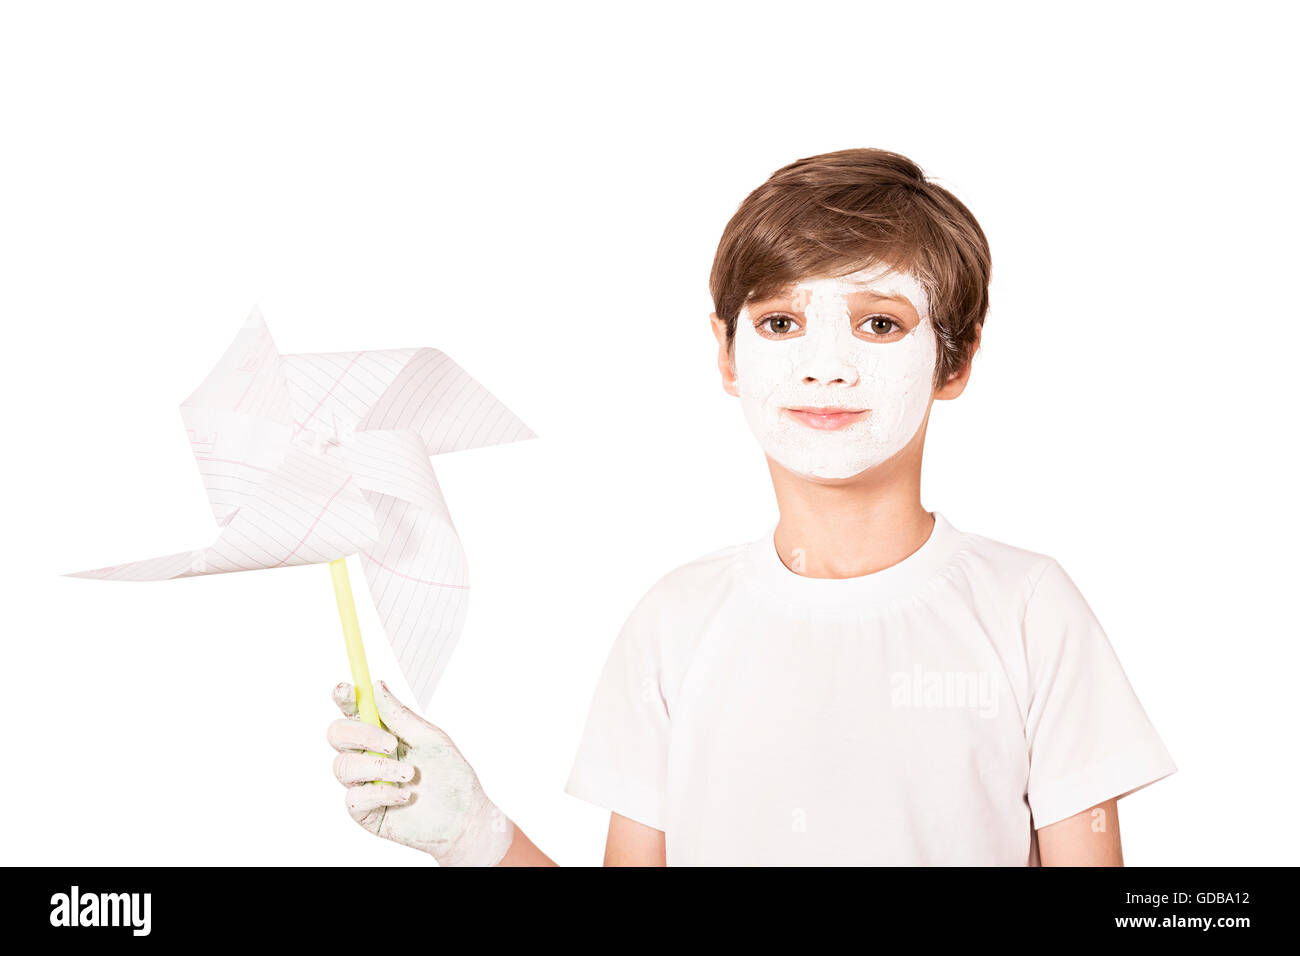 1 indian Kid boy face paint Standing and showing Pinwheel Stock Photo